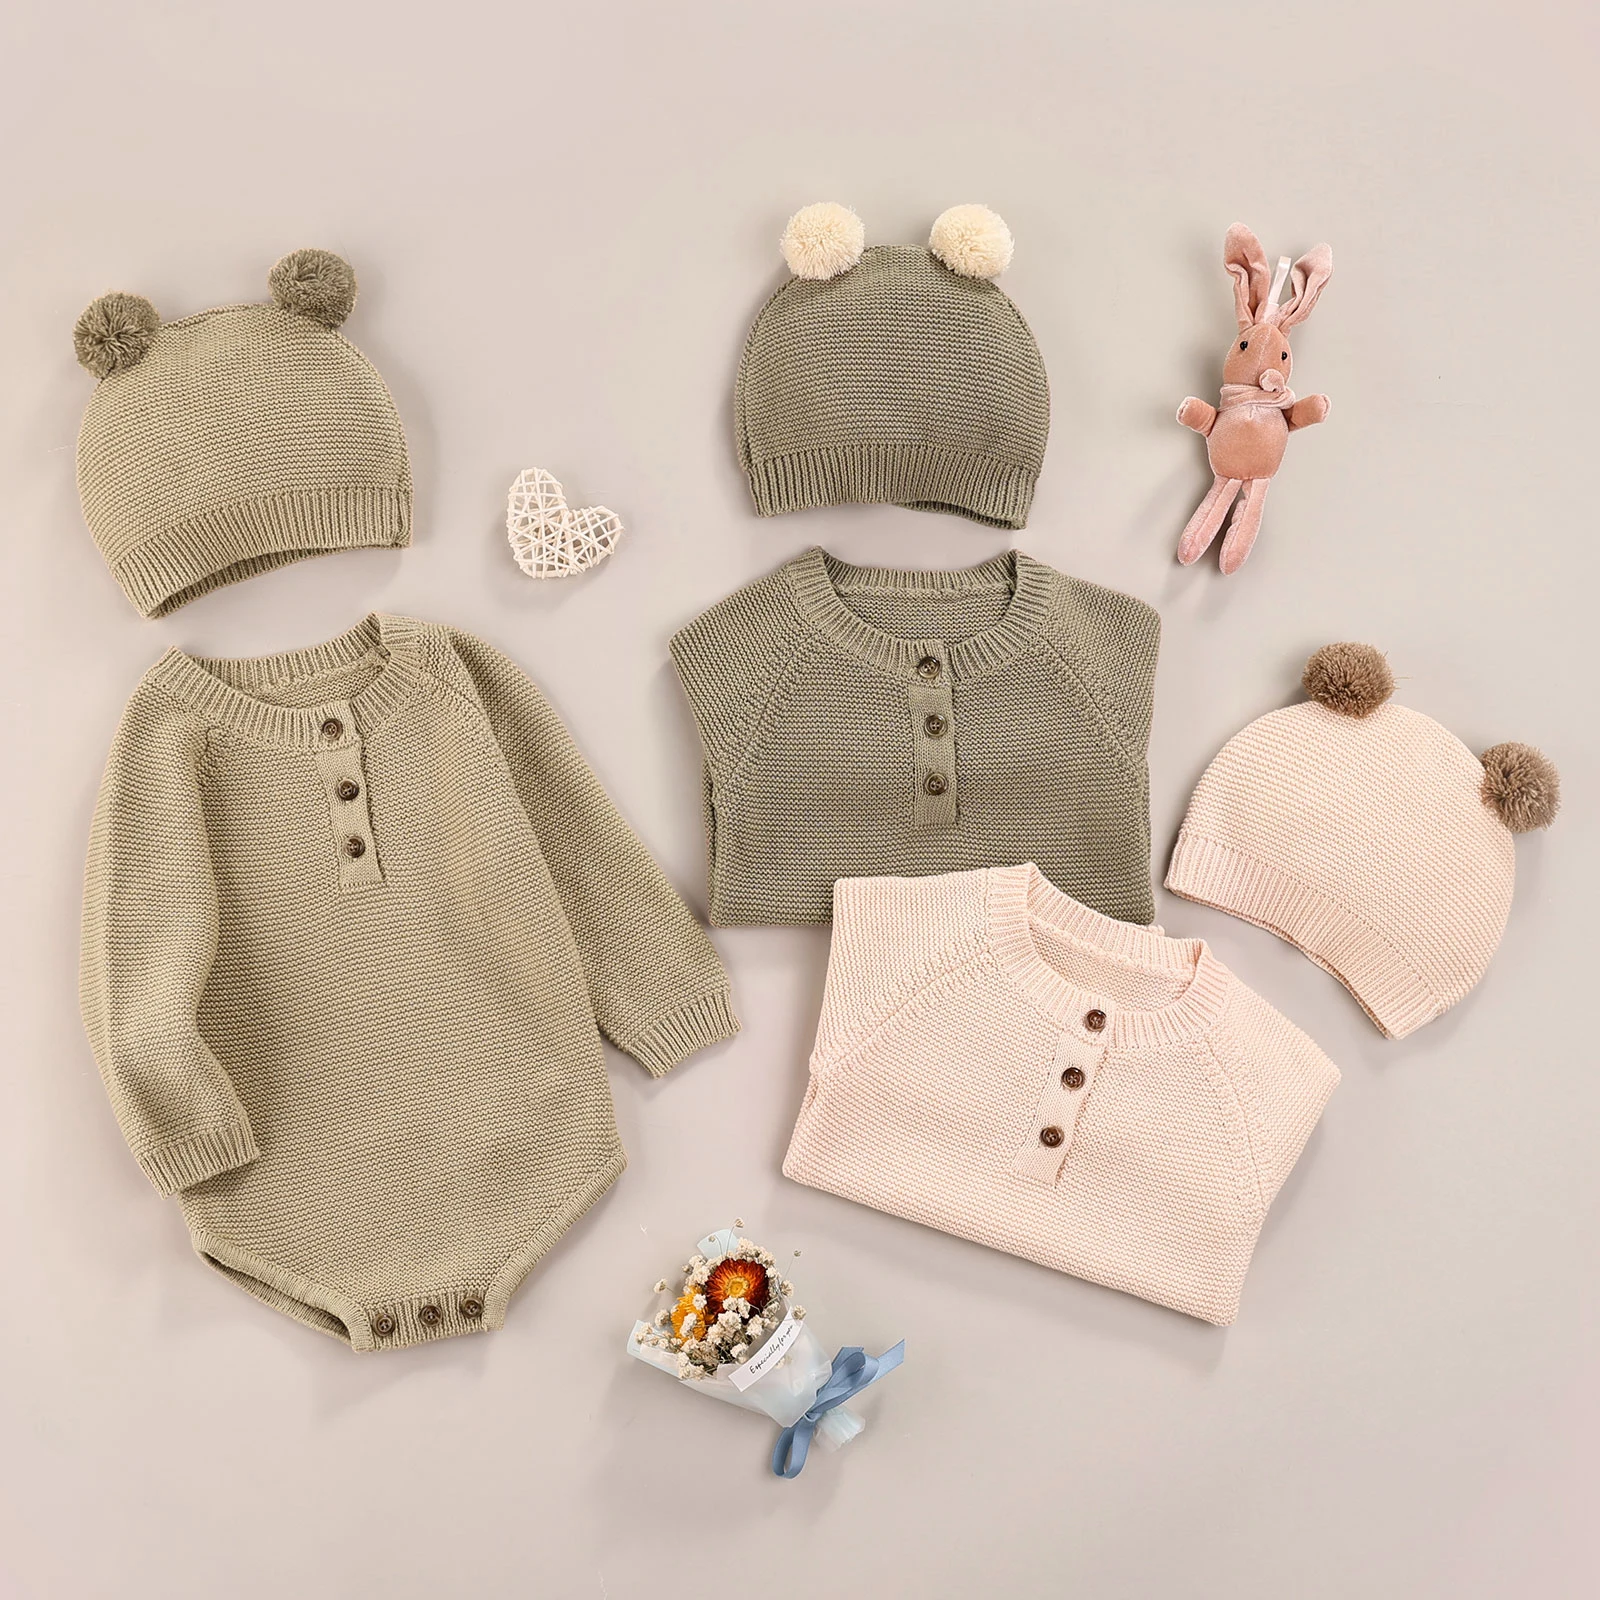 

Bmnmsl 2Pcs Newborn Solid Color Outfits Baby Long Sleeve Round Neck Knit Playsuit + Tie-up Cap with Pom Poms Suits